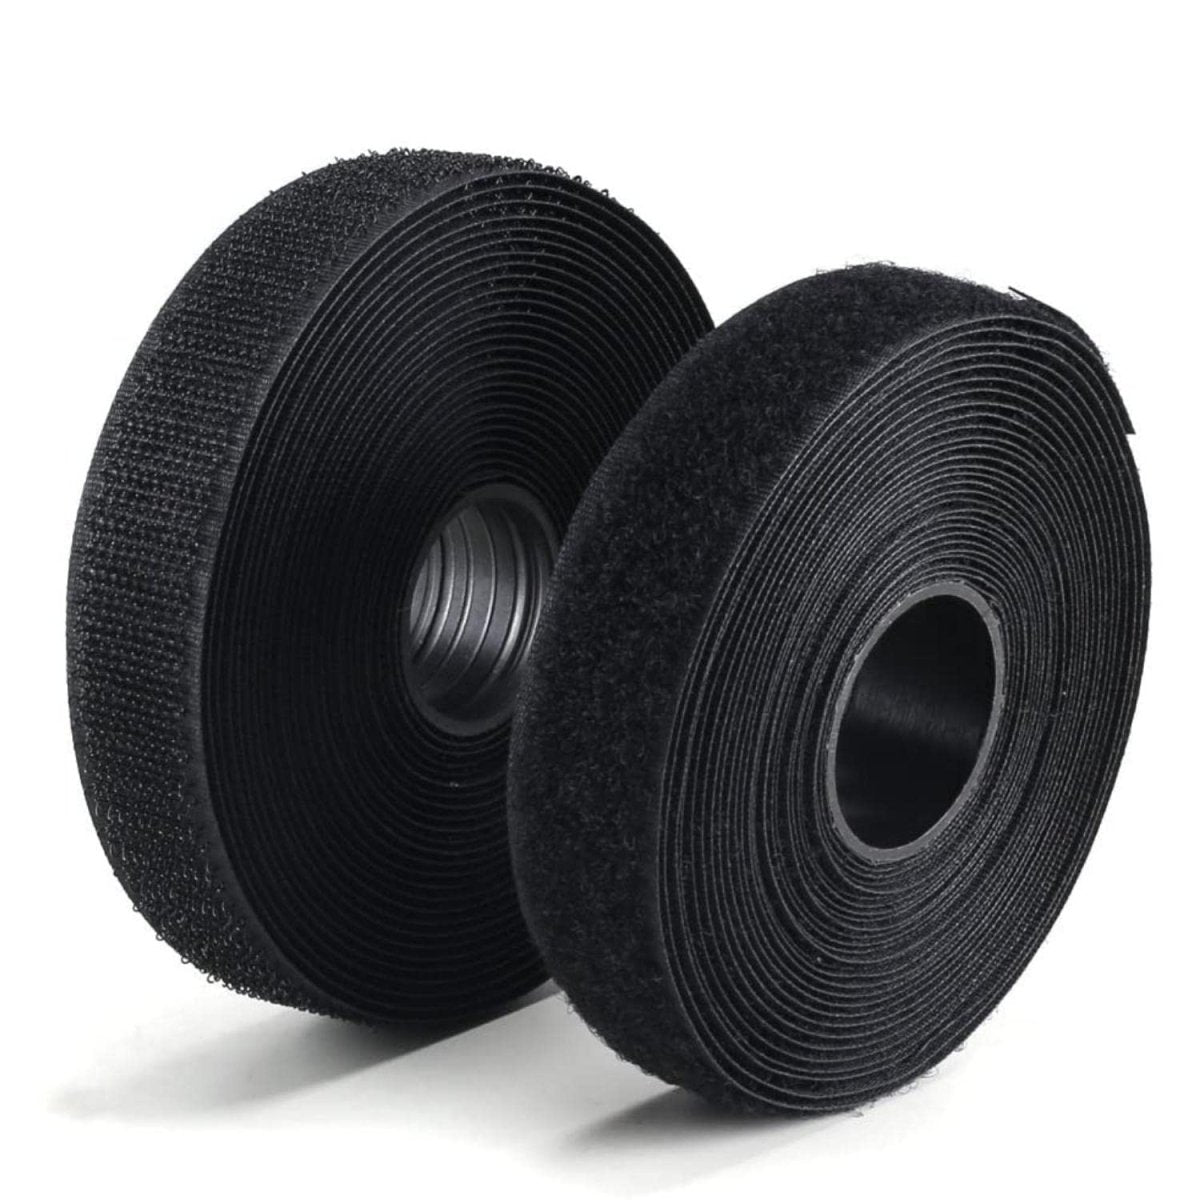 Hook and Loop Sew On Tape |No Glue on Back Side (25m x 25mm) ADHESIVE TAPES- Royalkart - The Urban Store